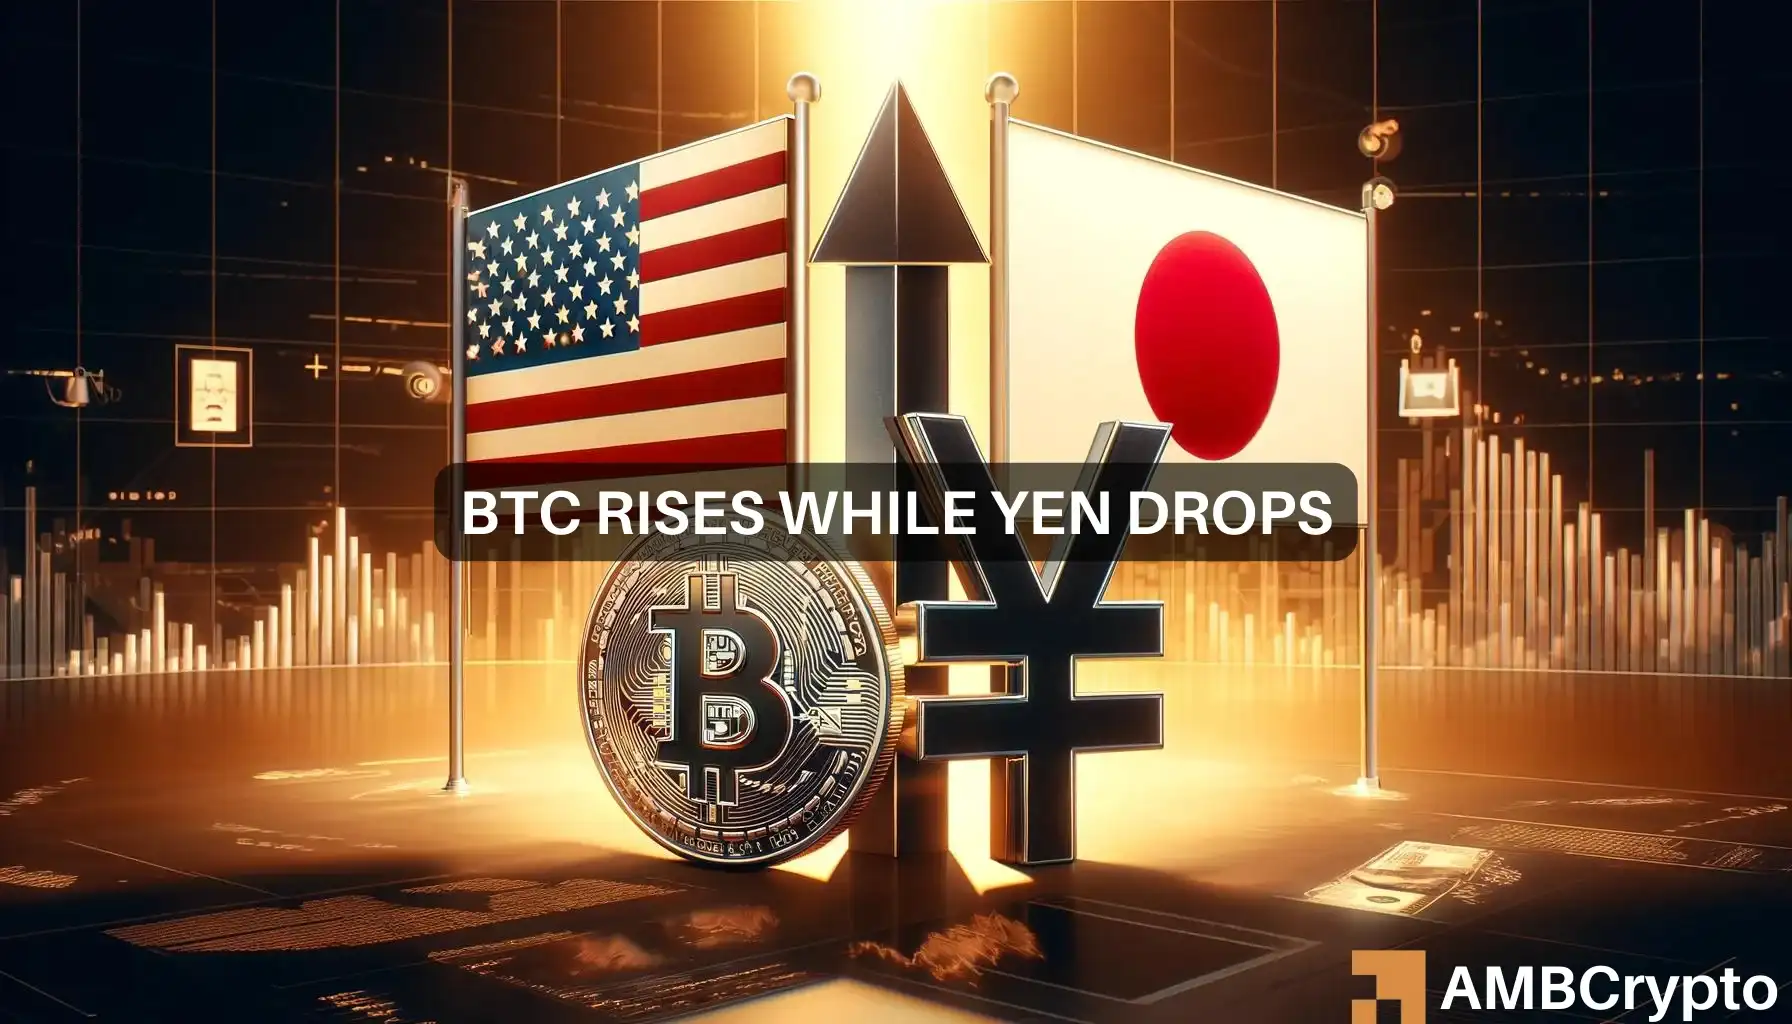 Bitcoin rises amidst Japanese yen crisis: ‘Nothing stops this train’